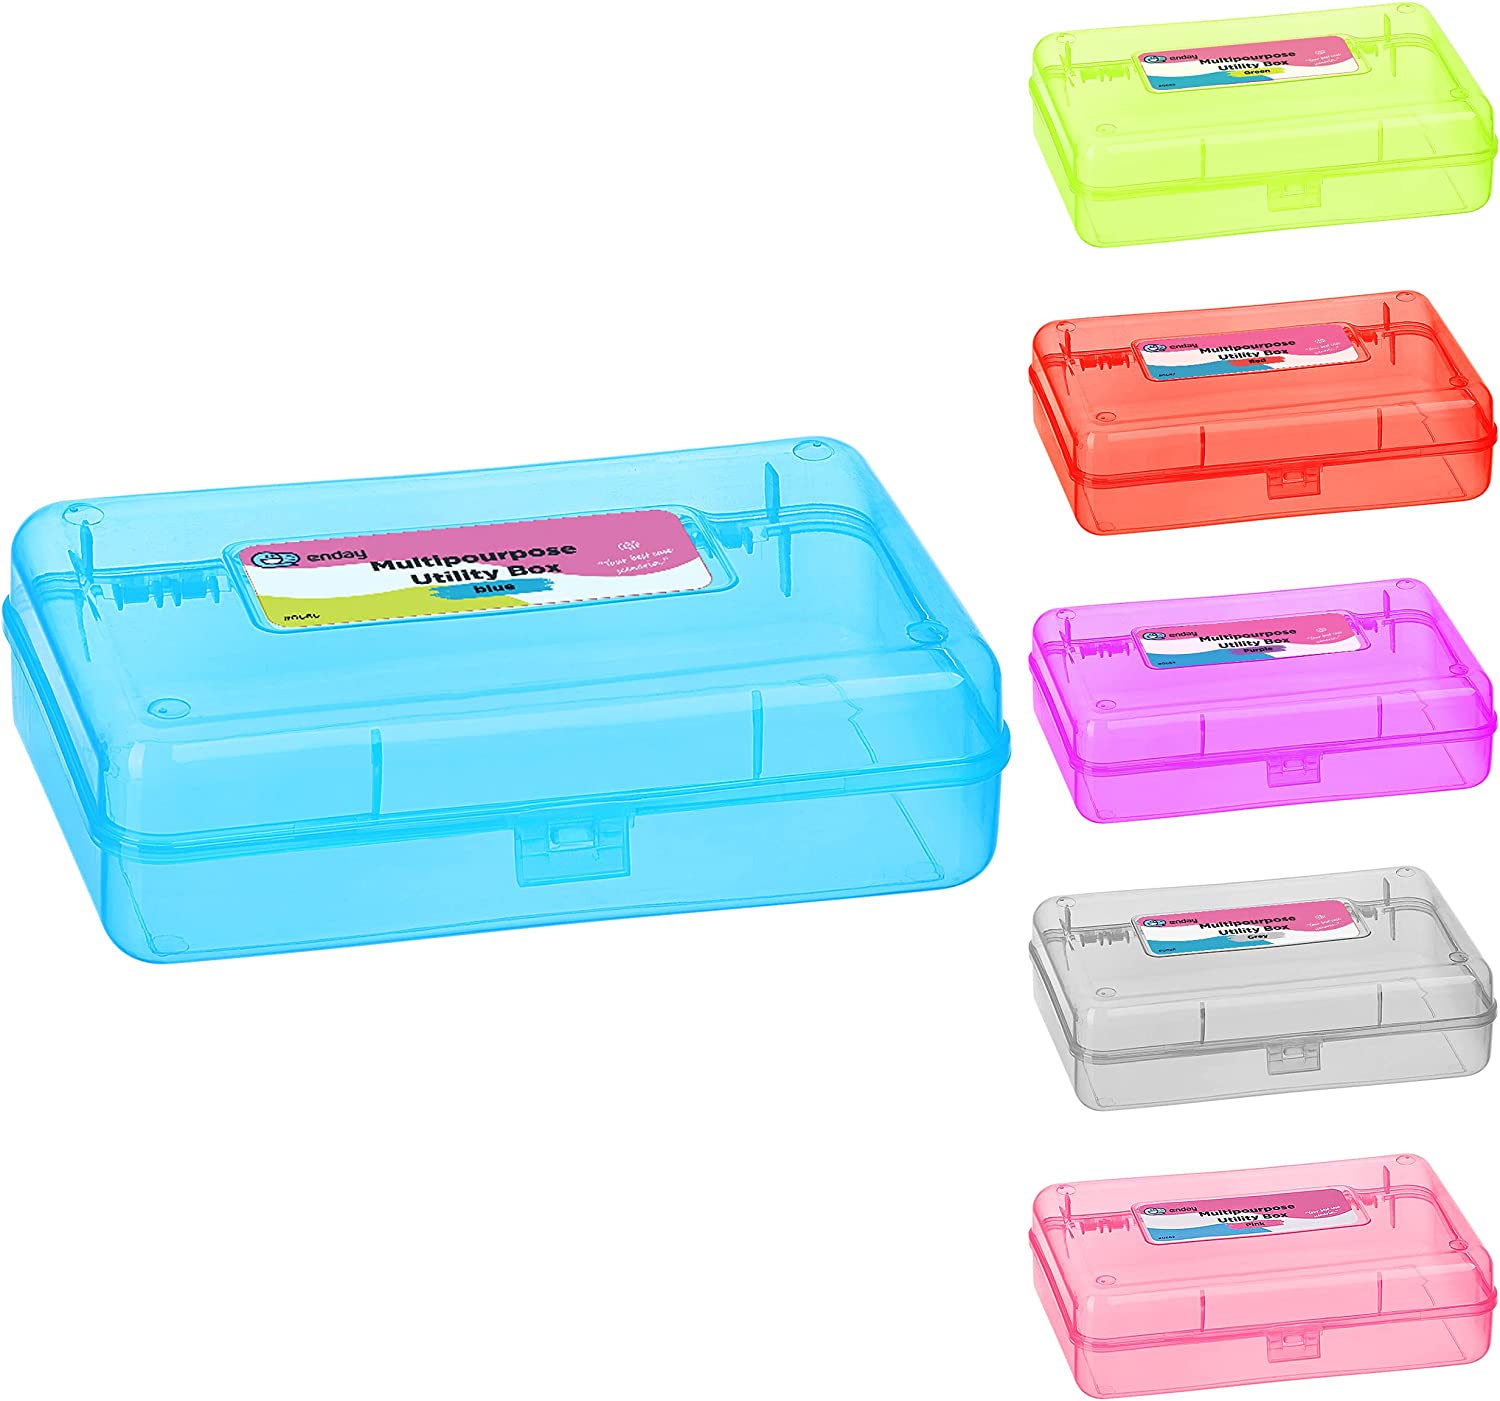  Enday Crayon Box Storage Containers, Clear Crayon Case